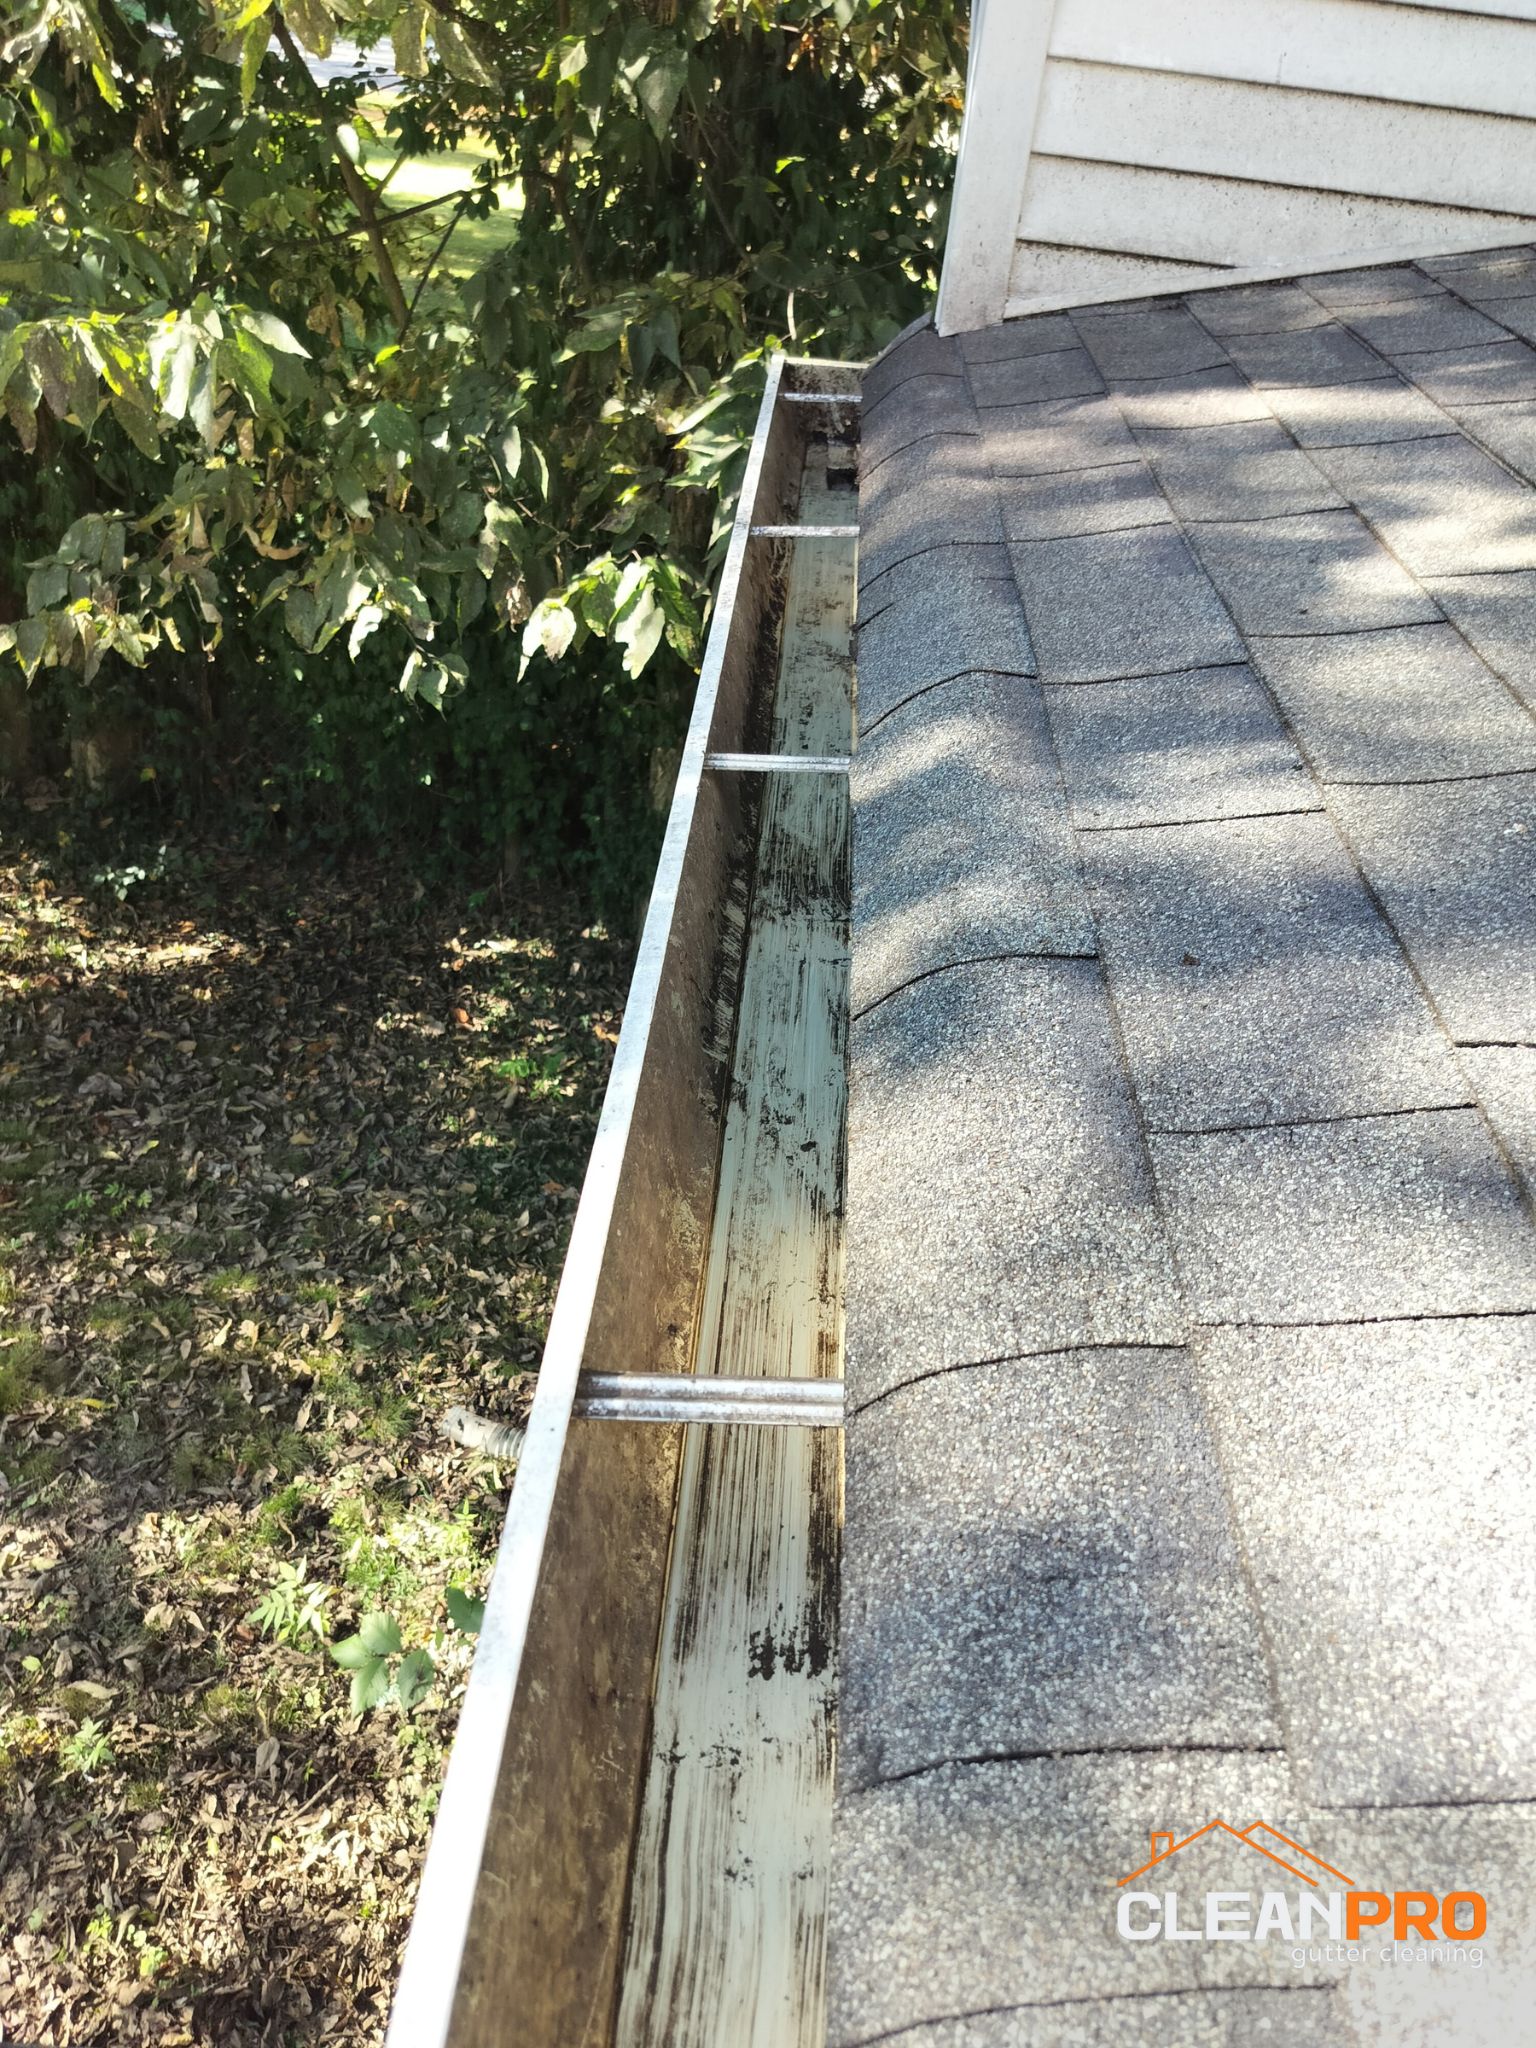 Quality Gutter Cleaning in Raleigh NC